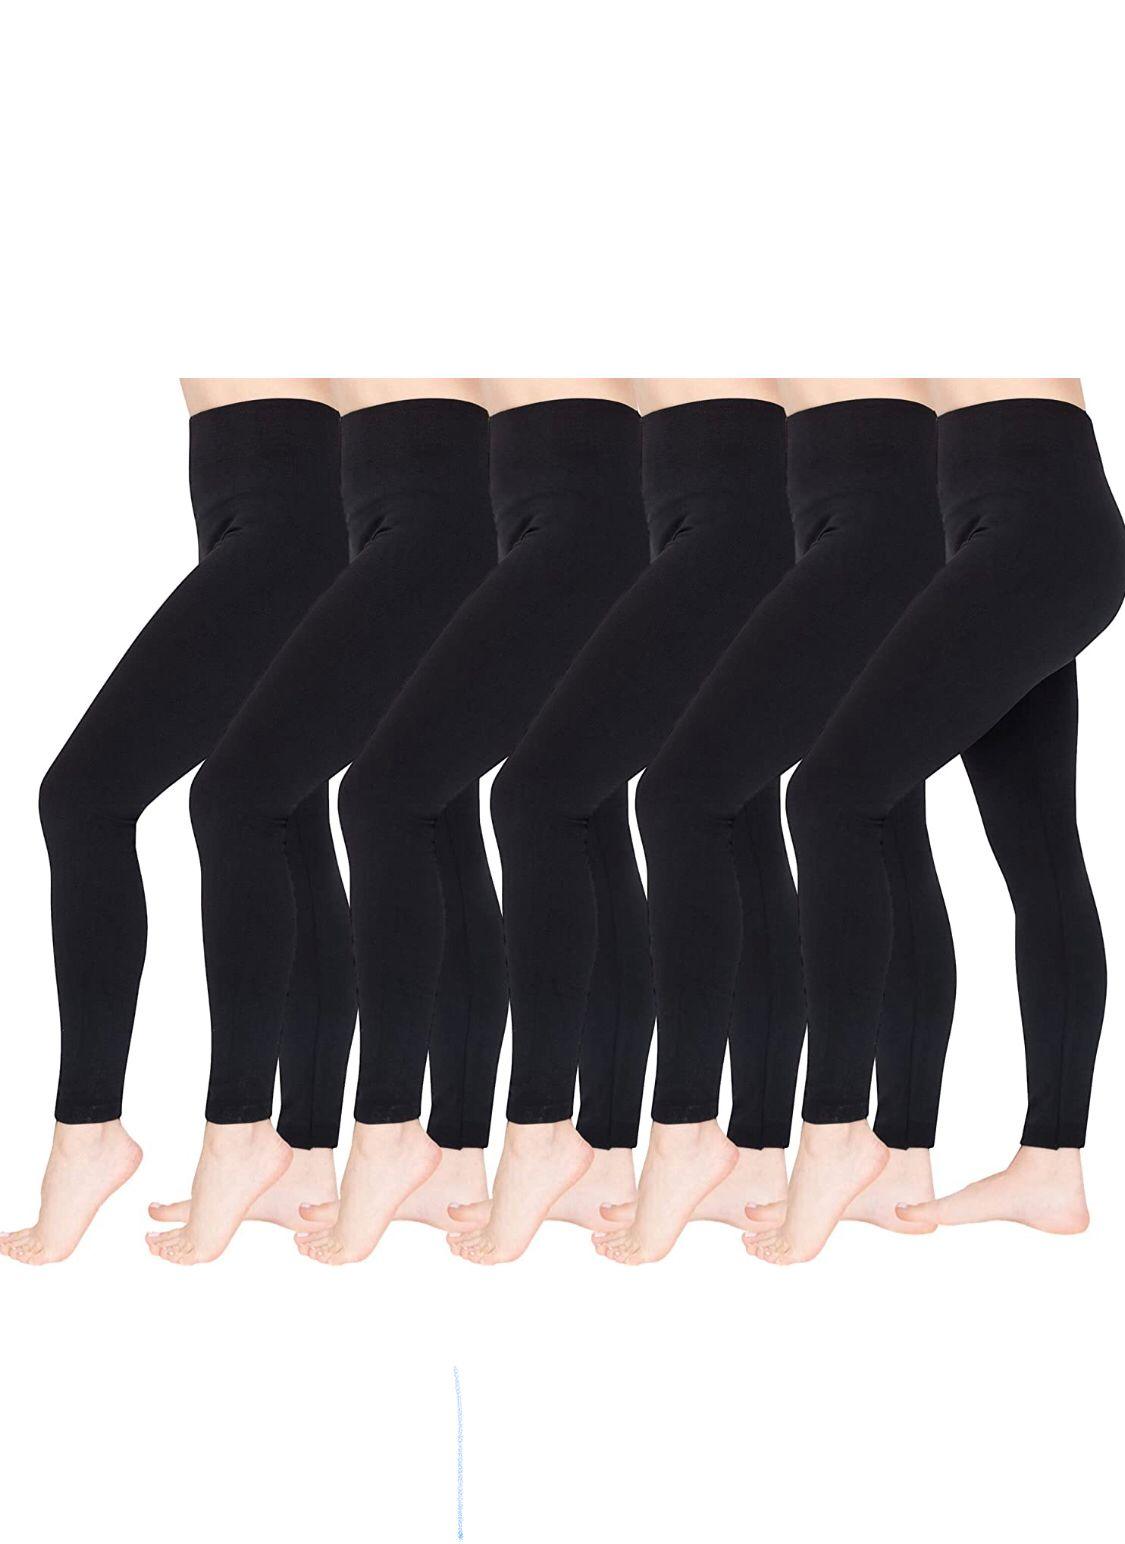 Buy DISOLVE® Women's Winter Pantyhose Tights Elastic Fleece Lined Leggings  Pants Footed Tights Size (28 till 34) Pack of 1 at Amazon.in